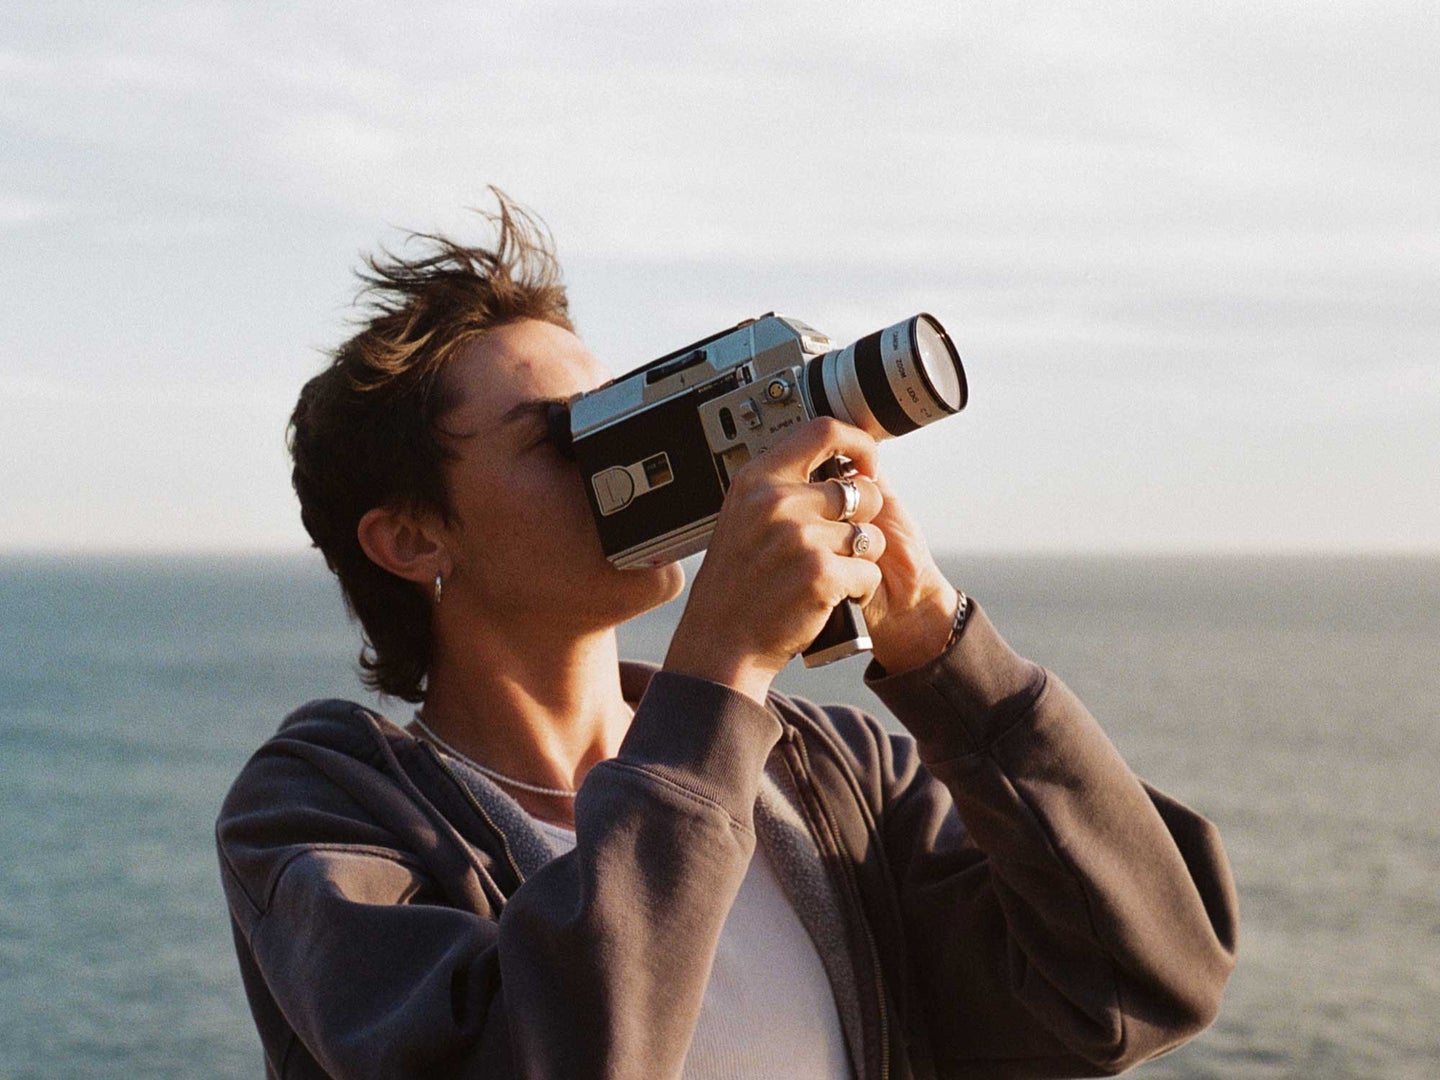 A person shooting with a Super 8 camera on the beach pointing at the sky.